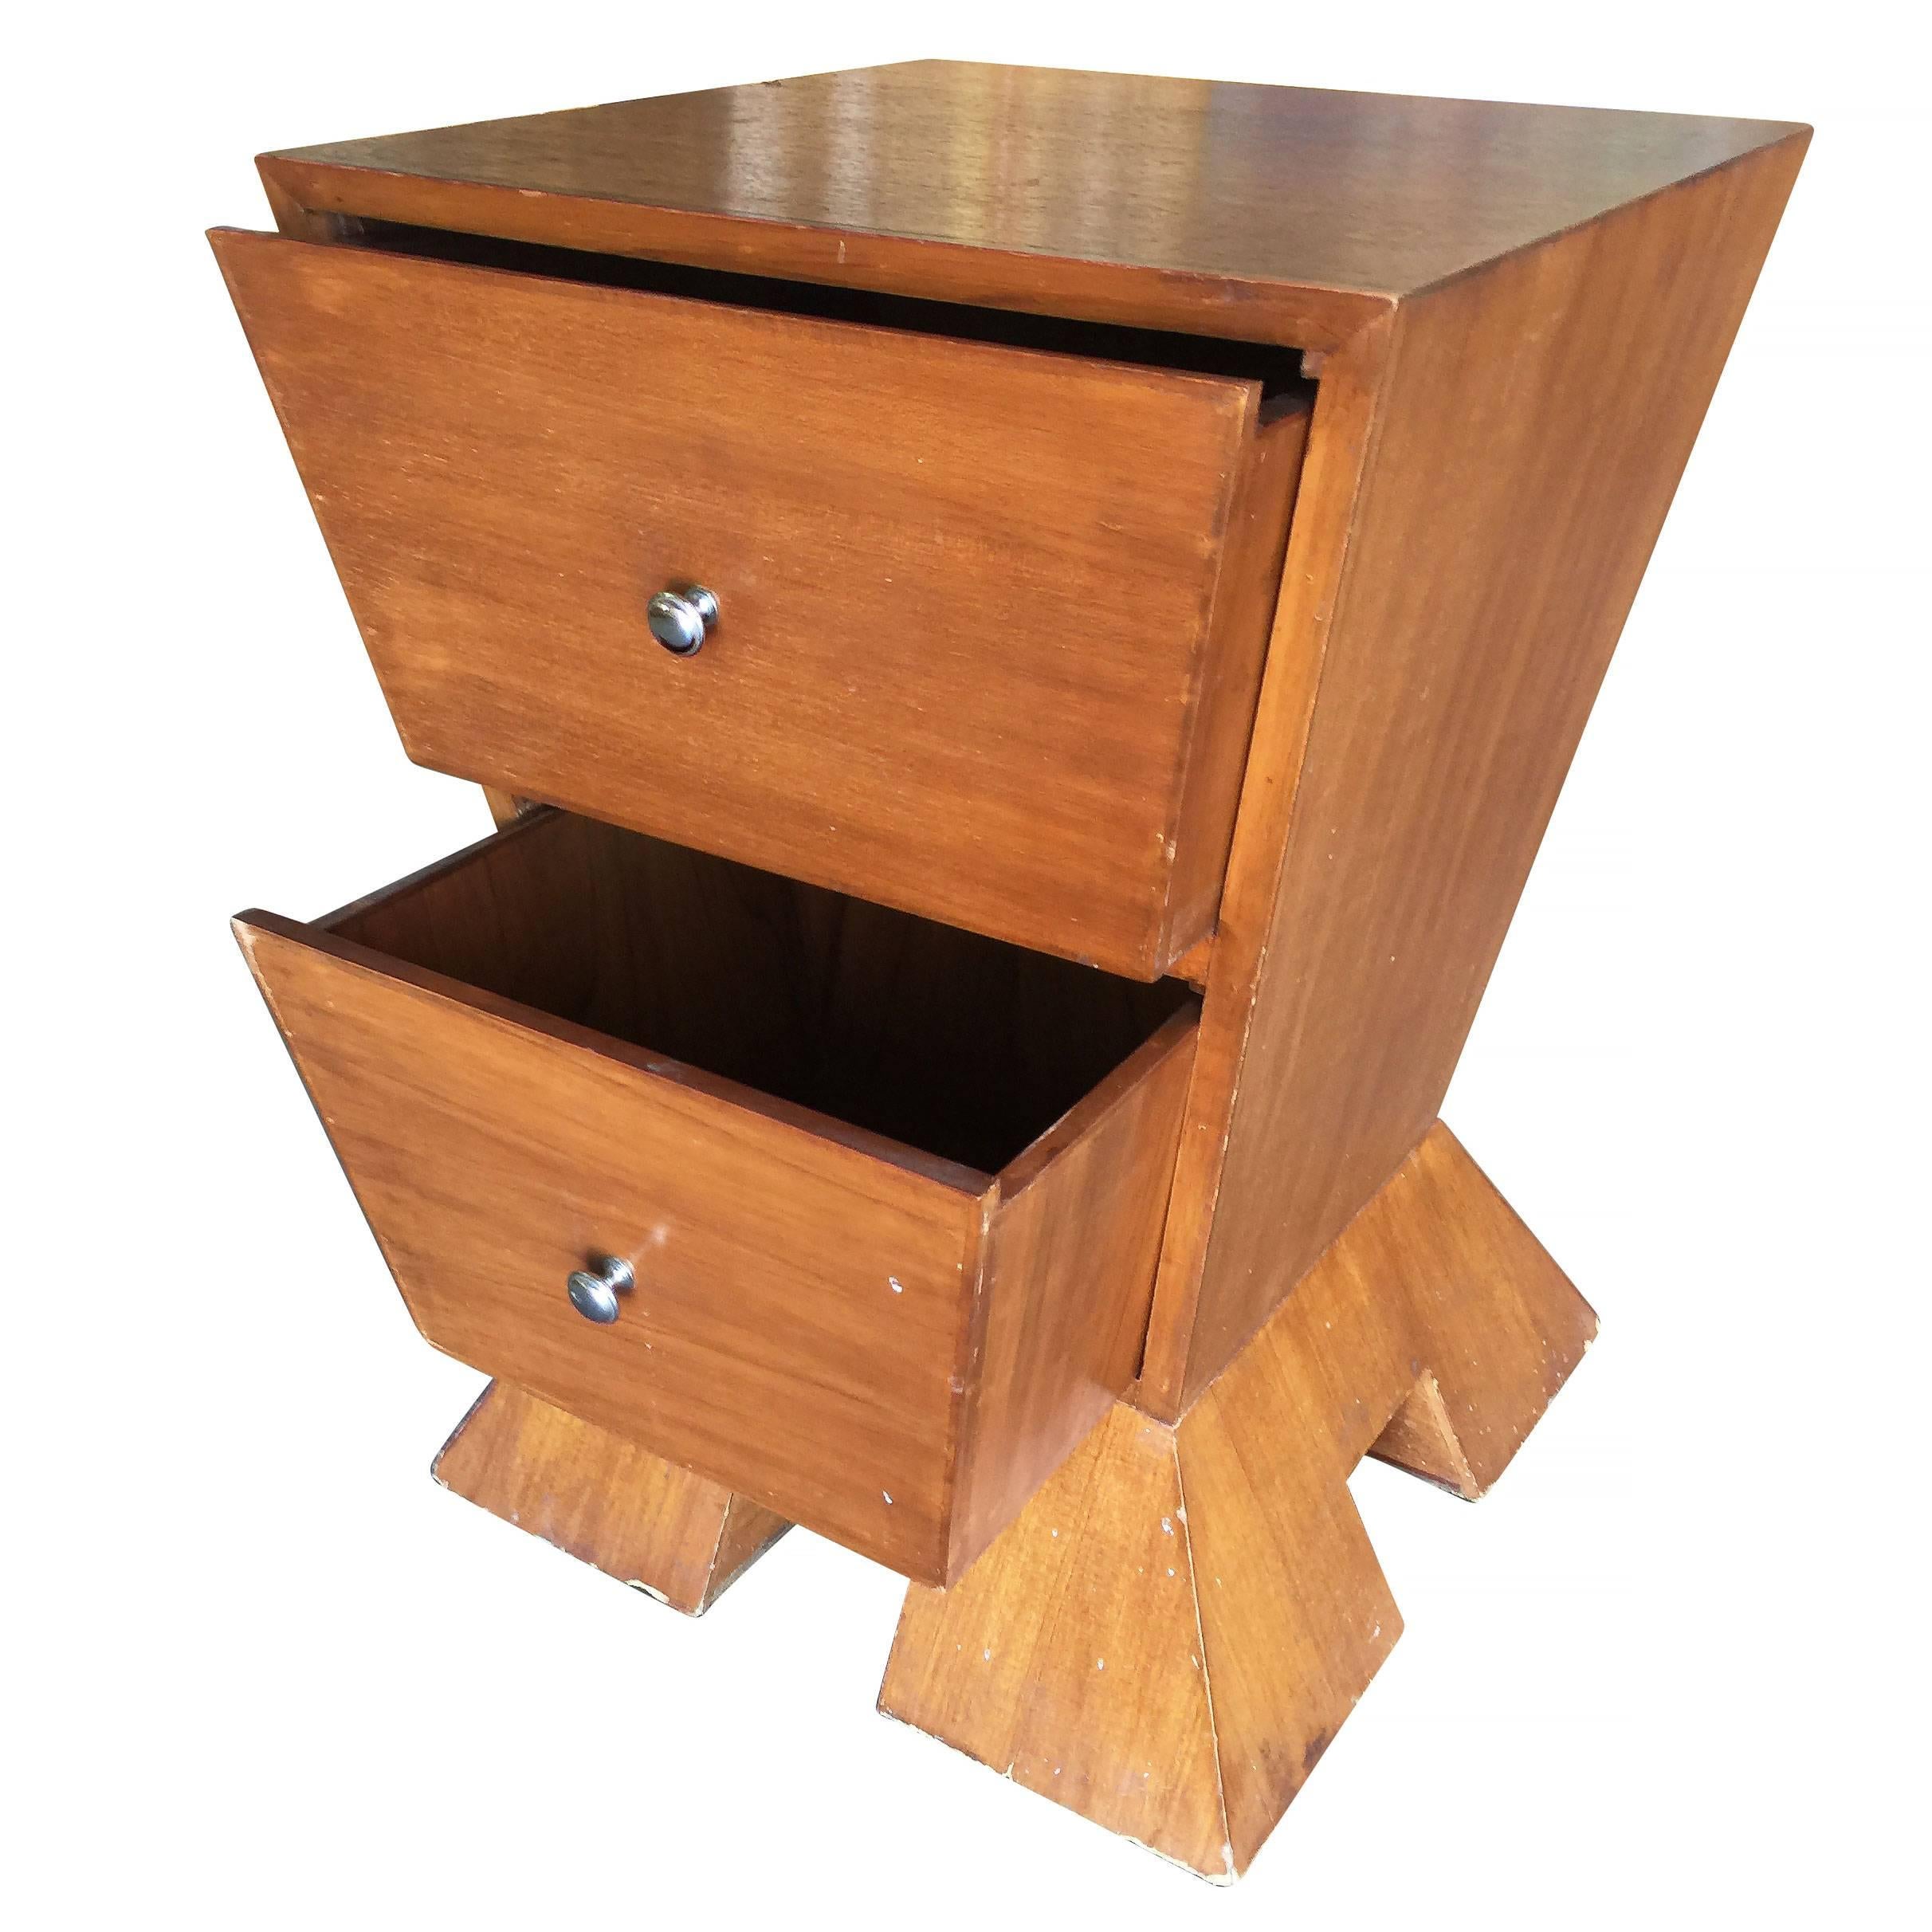 Modernist Midcentury Inverted Triangle Bedside Table In Good Condition For Sale In Van Nuys, CA